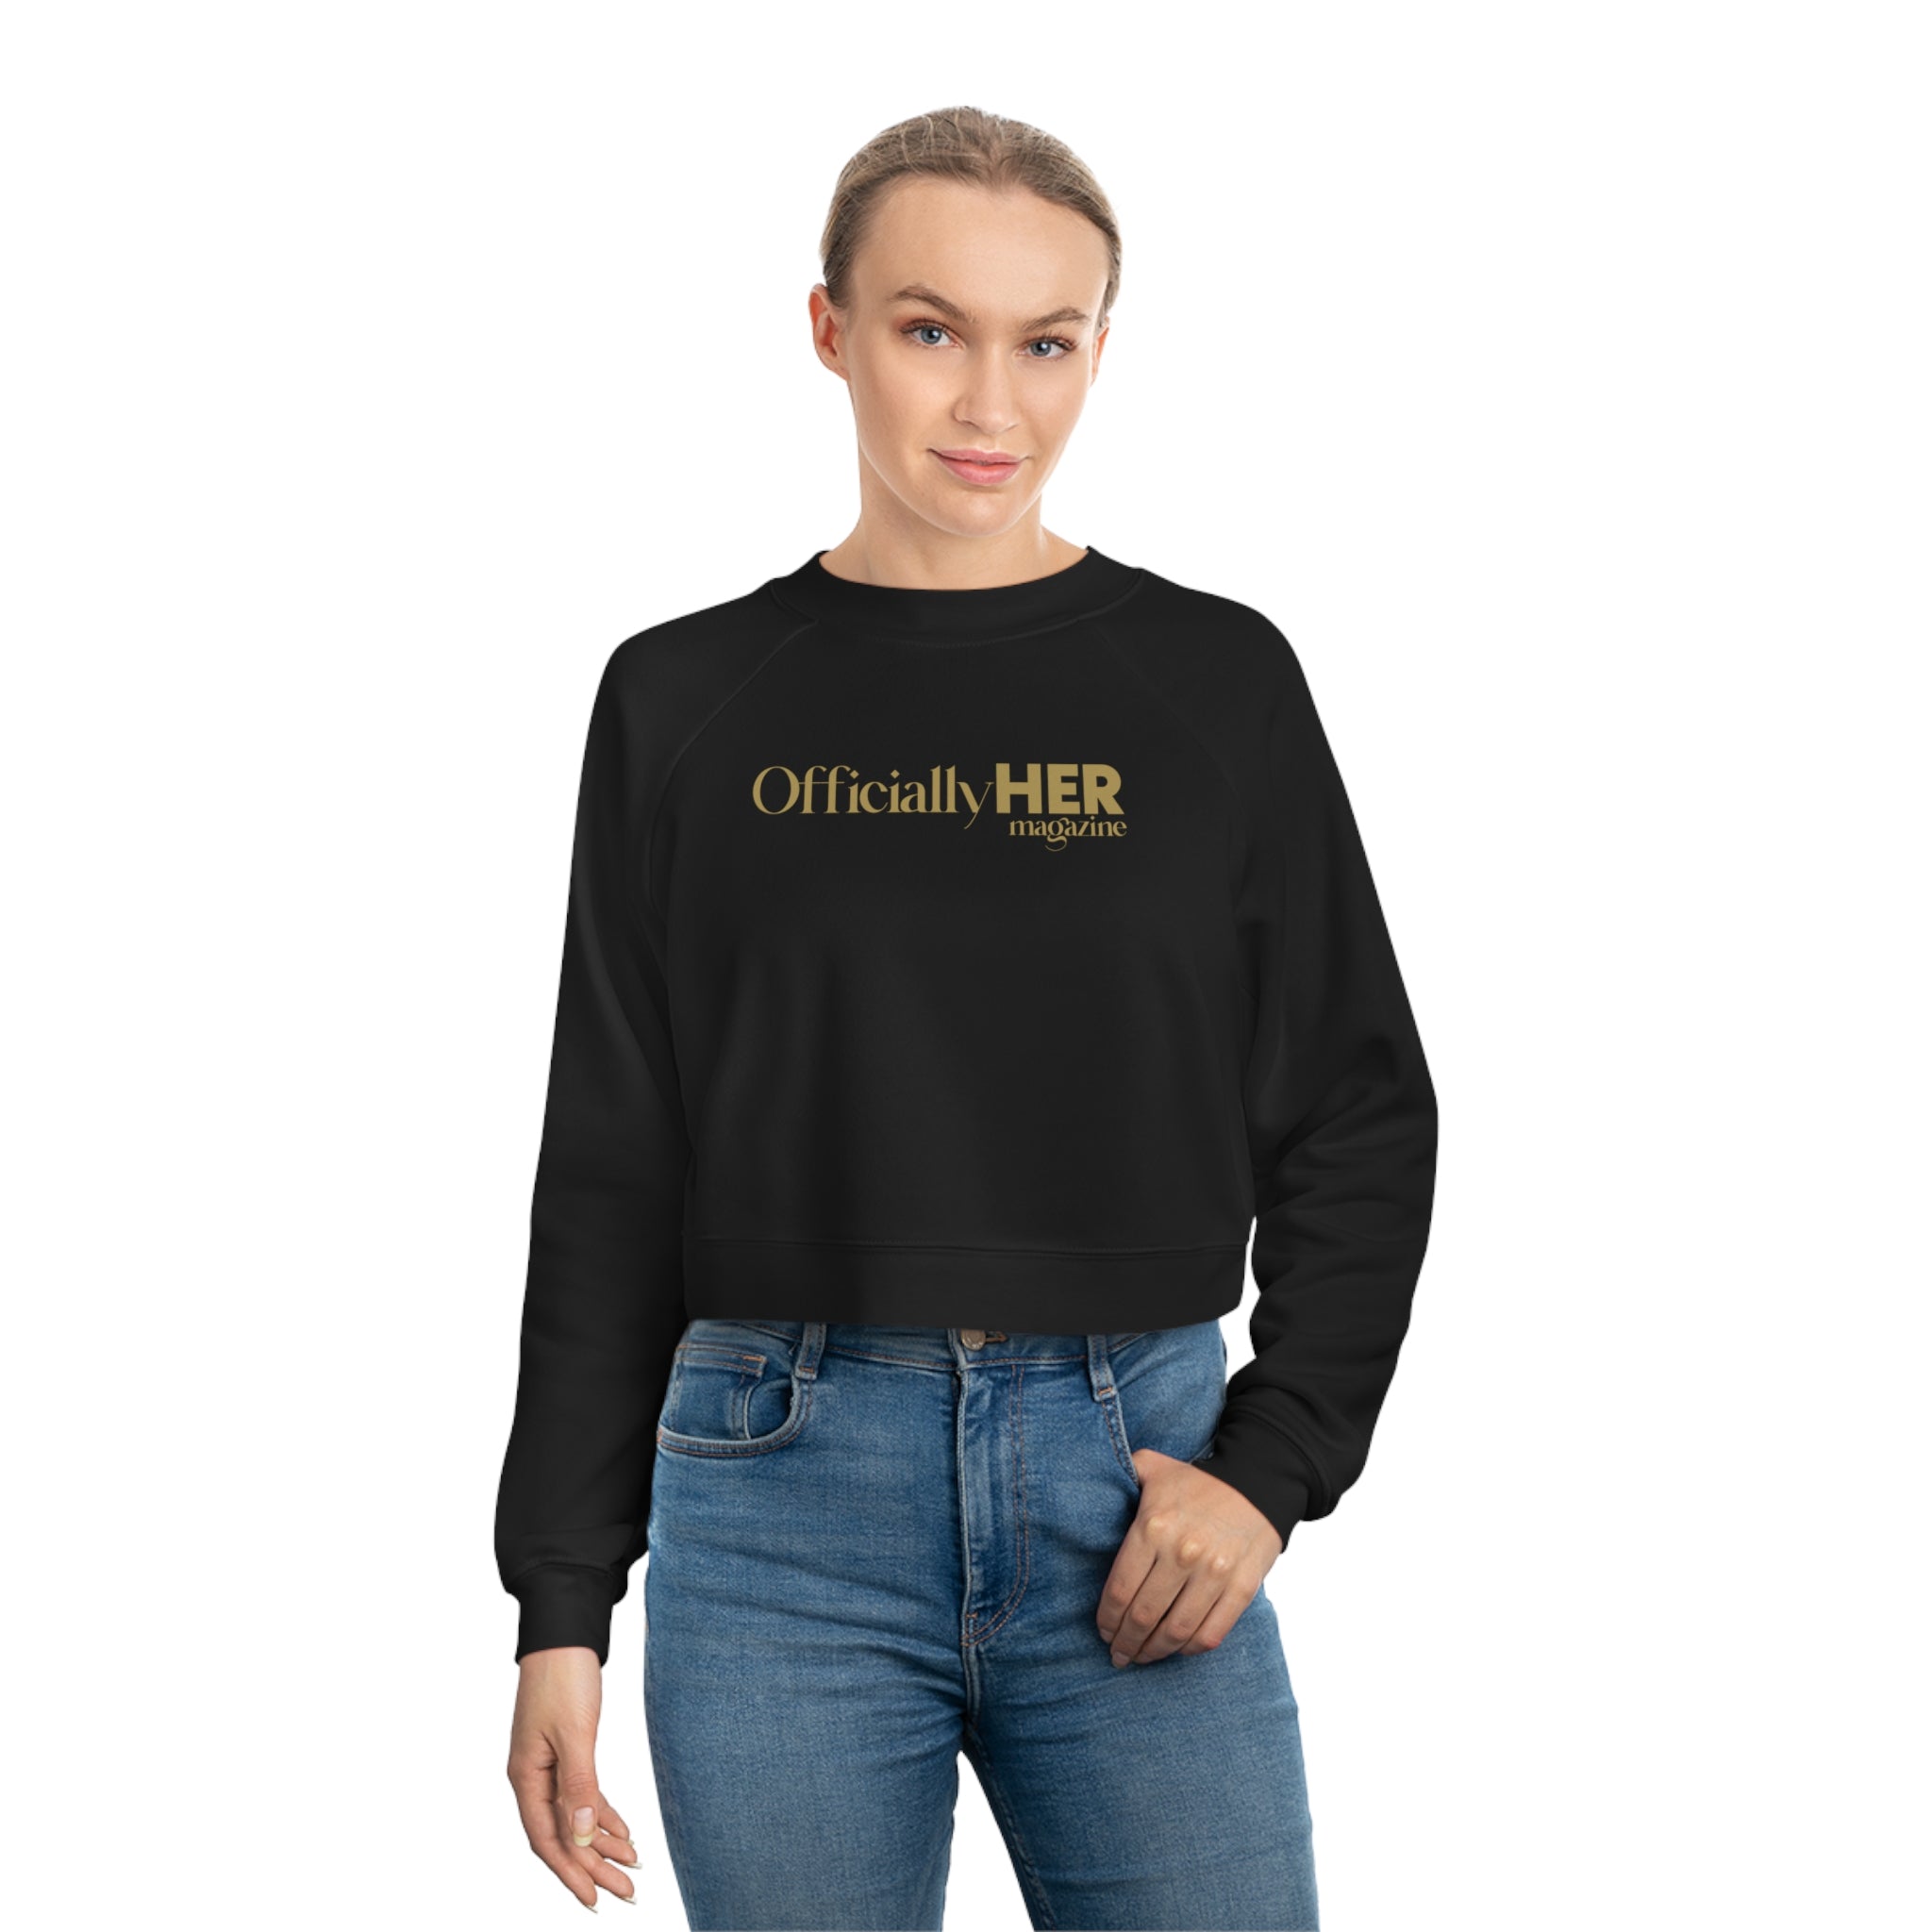 Officially HER Women's Cropped Fleece Pullover